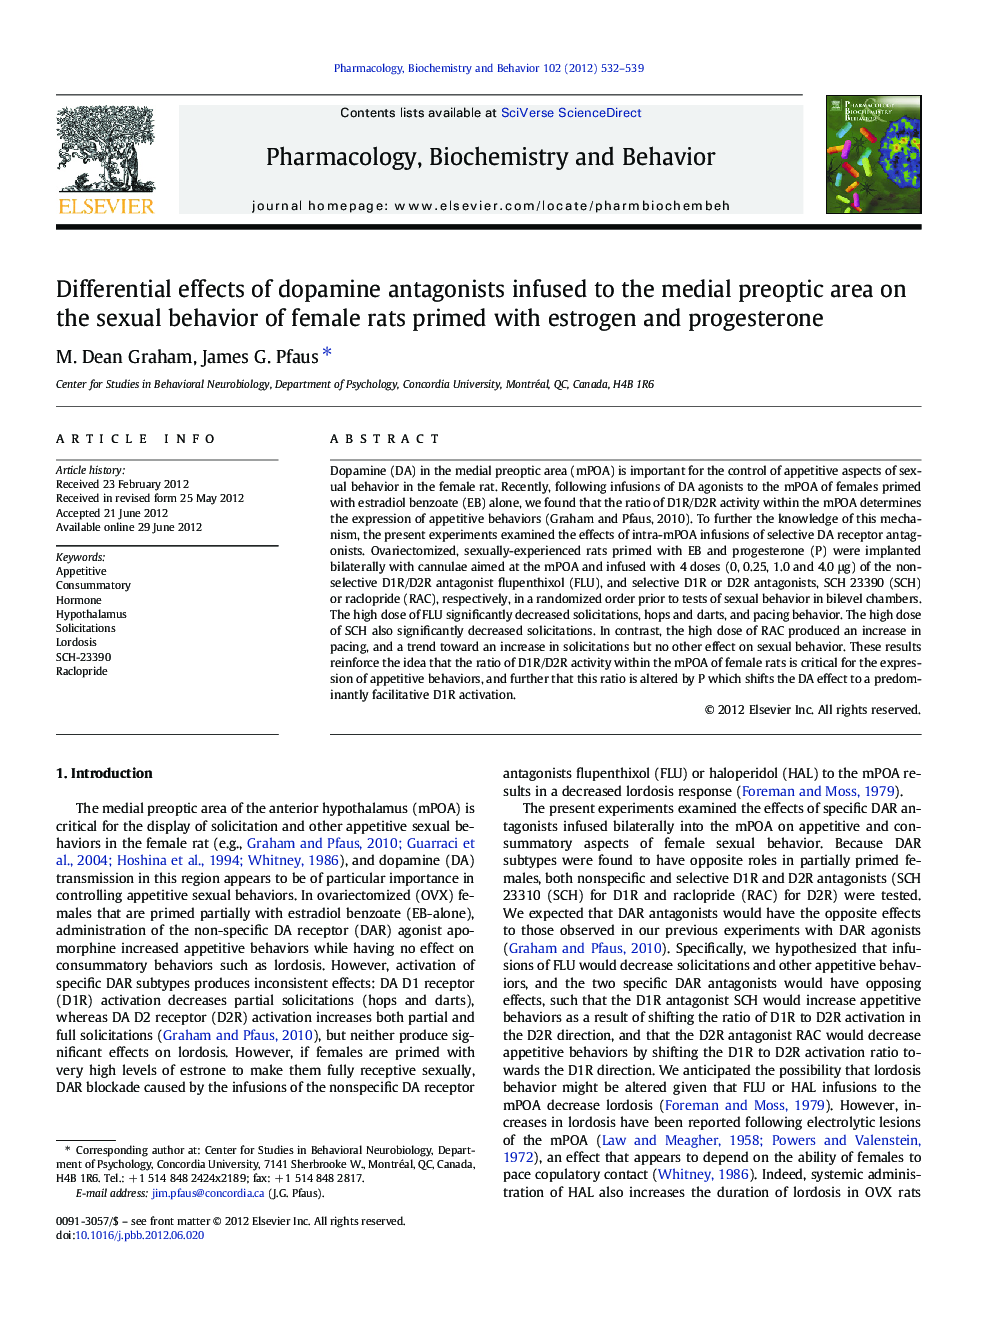 Differential effects of dopamine antagonists infused to the medial preoptic area on the sexual behavior of female rats primed with estrogen and progesterone